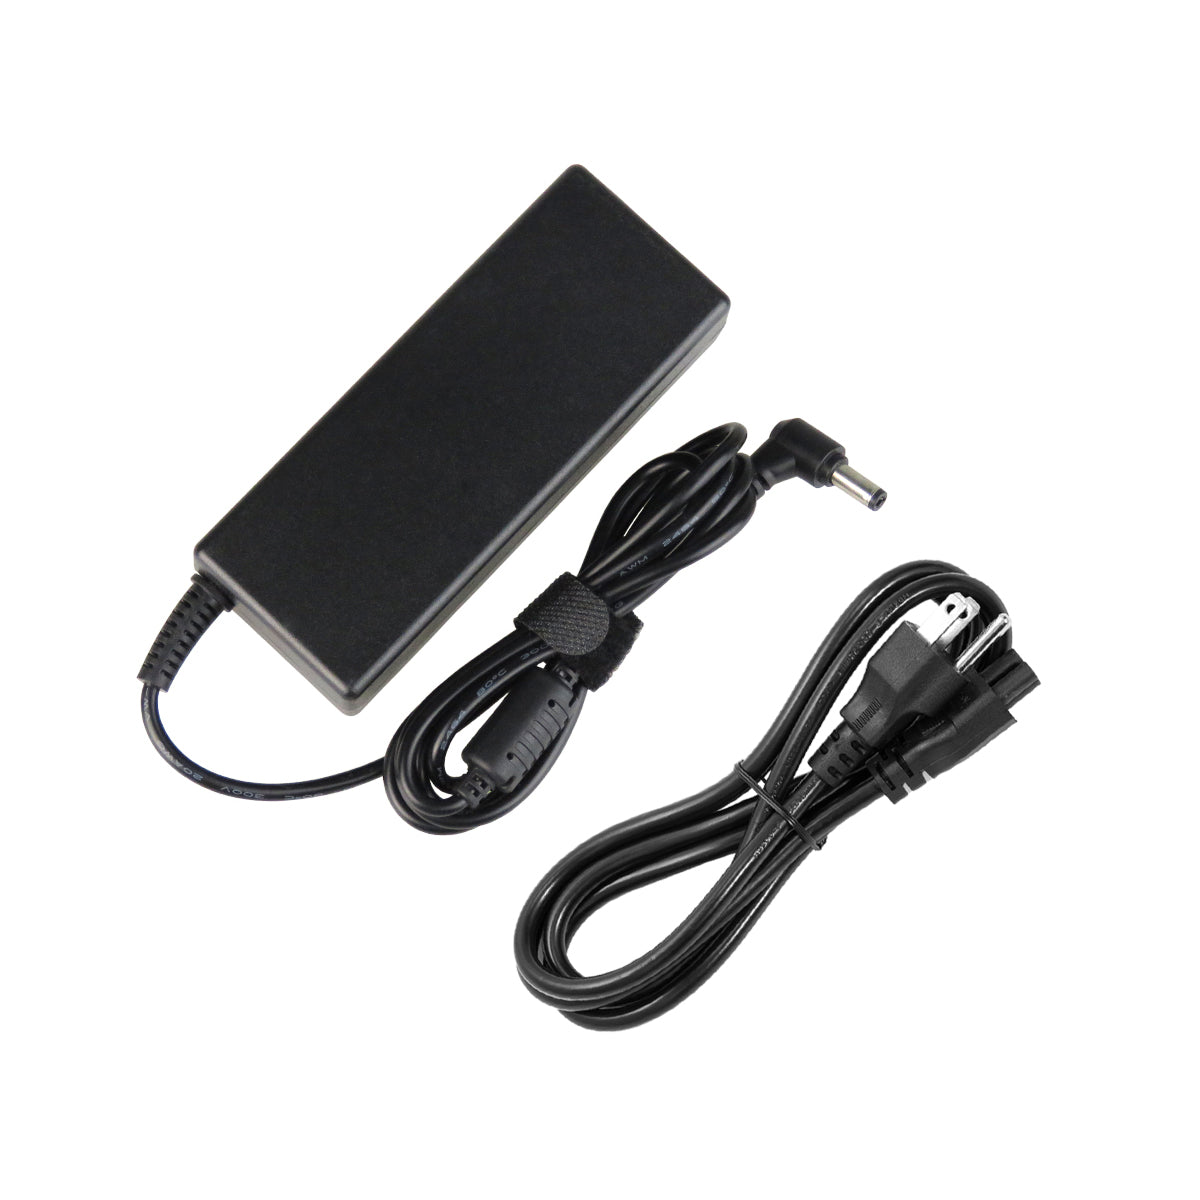 AC Adapter Charger for ASUS G51JX Notebook.